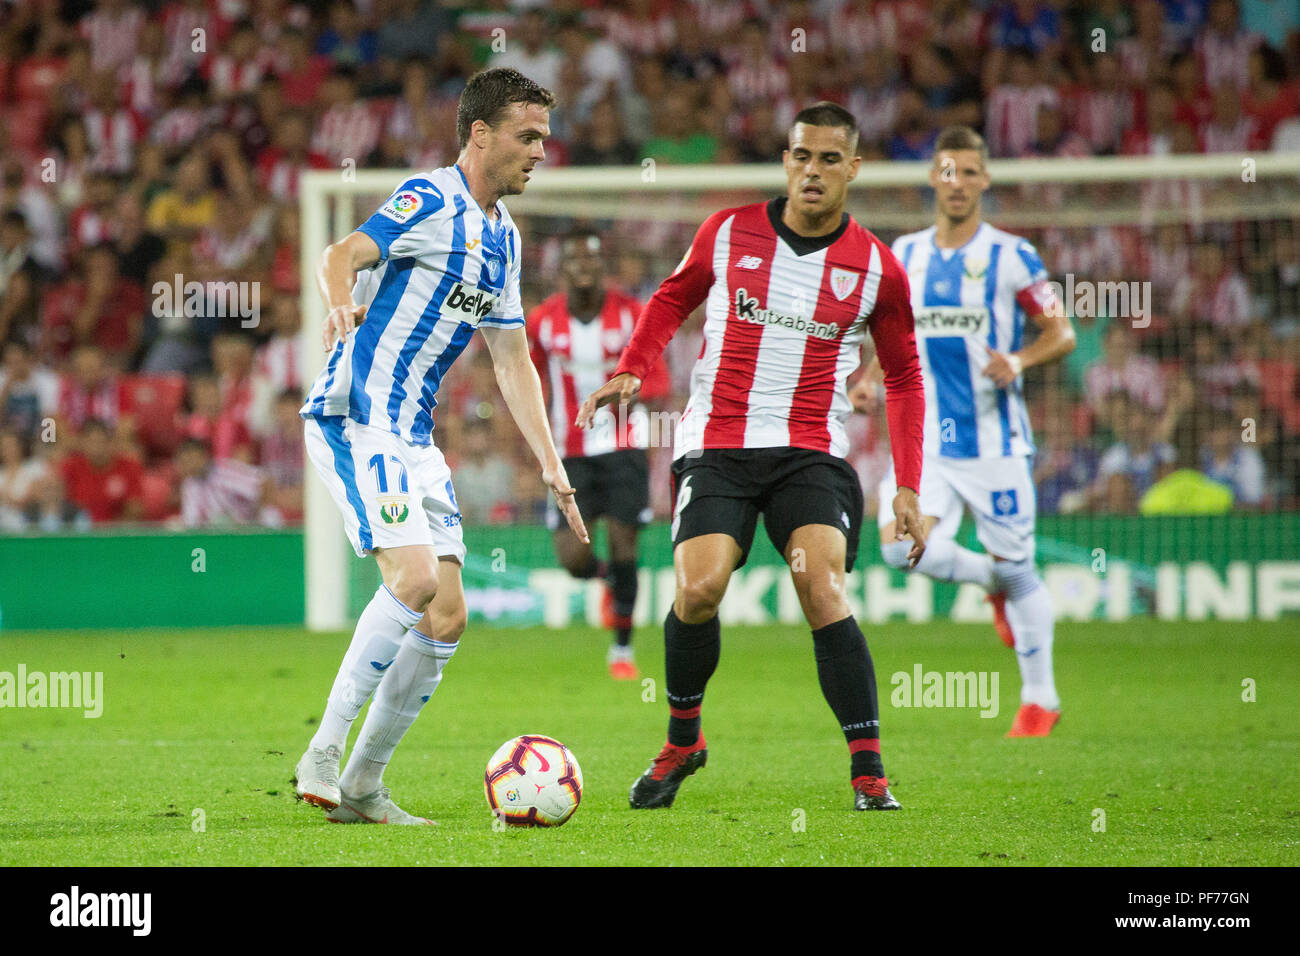 Bilbao, Spain. August 20, 2018 - Dani Garcia of Athletic Club and Eraso of CD Leganes in action during the match played in San Mames Stadium between Athletic Club and CD Leganés in Bilbao, Spain, at Ago. 20th 2018. Credit: AFP7/ZUMA Wire/Alamy Live News Stock Photo